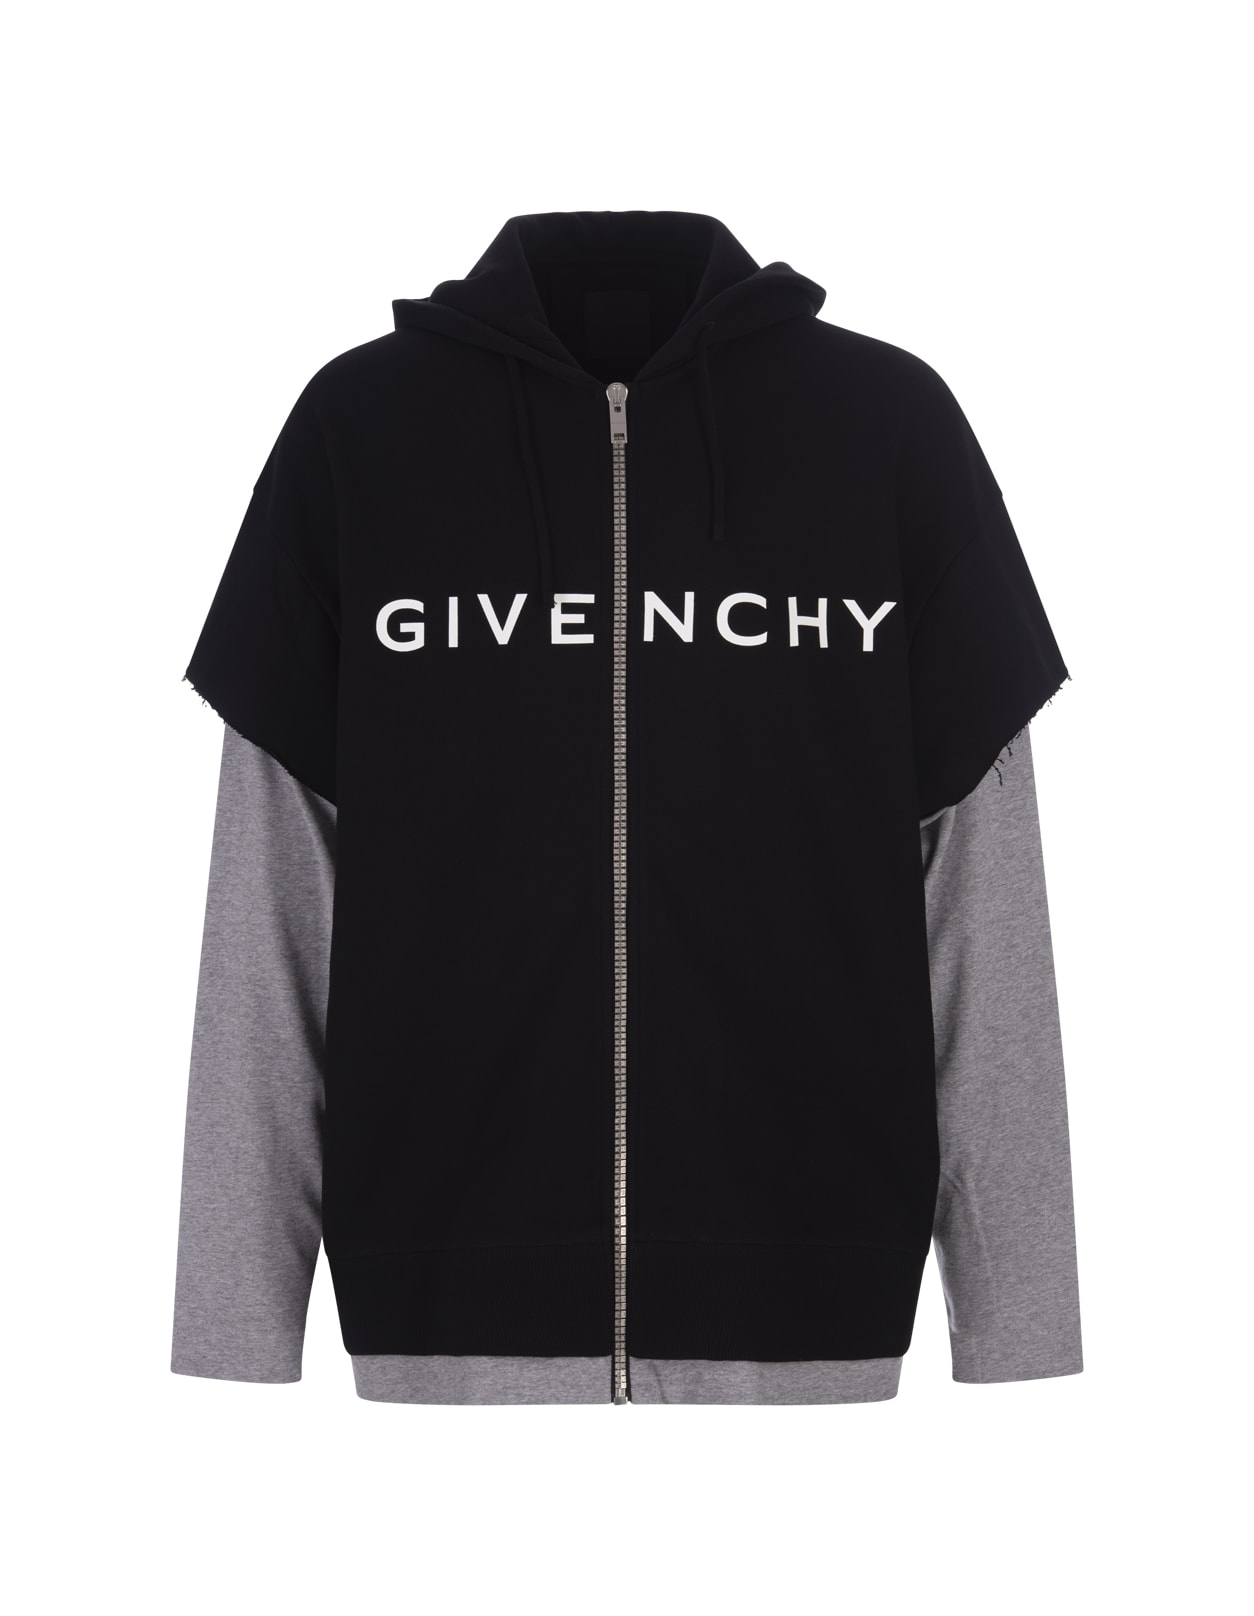 GIVENCHY BLACK AND GREY DOUBLE LAYER ZIPPED HOODIE